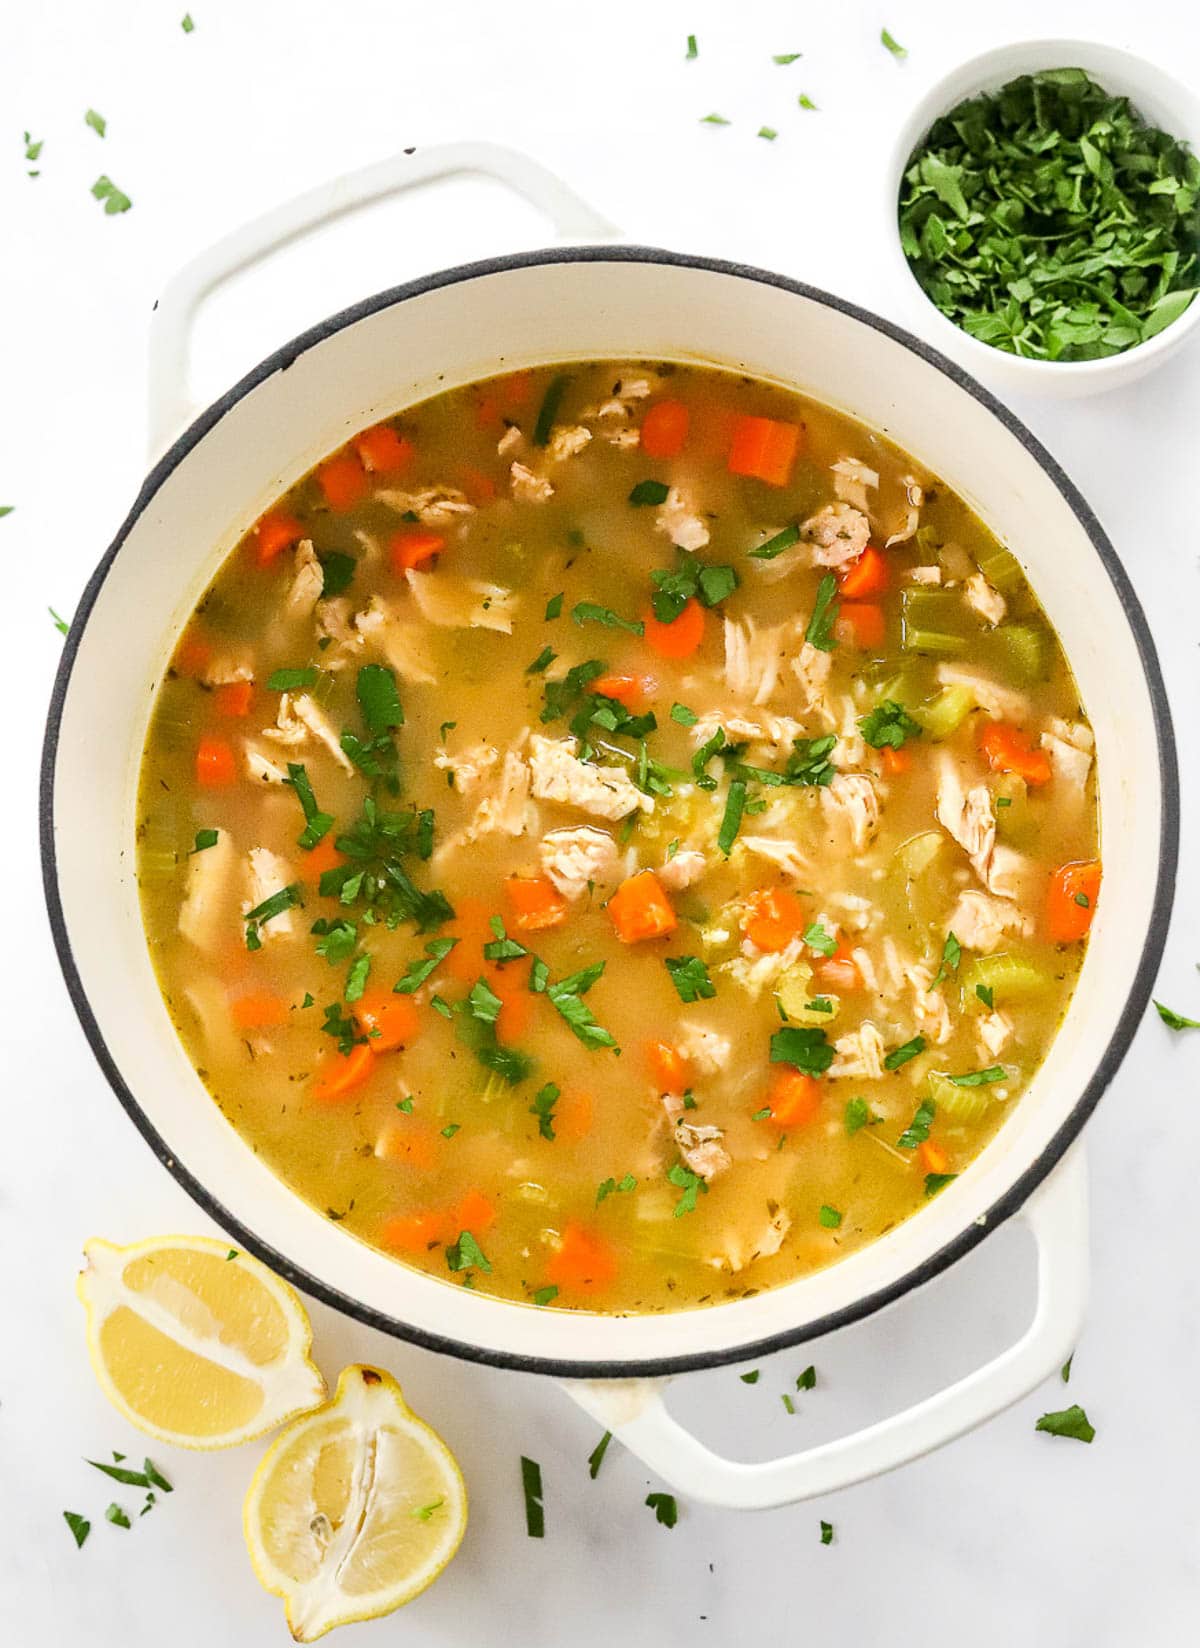 Turkey and rice soup with carrots, celery and parsley in white pot.